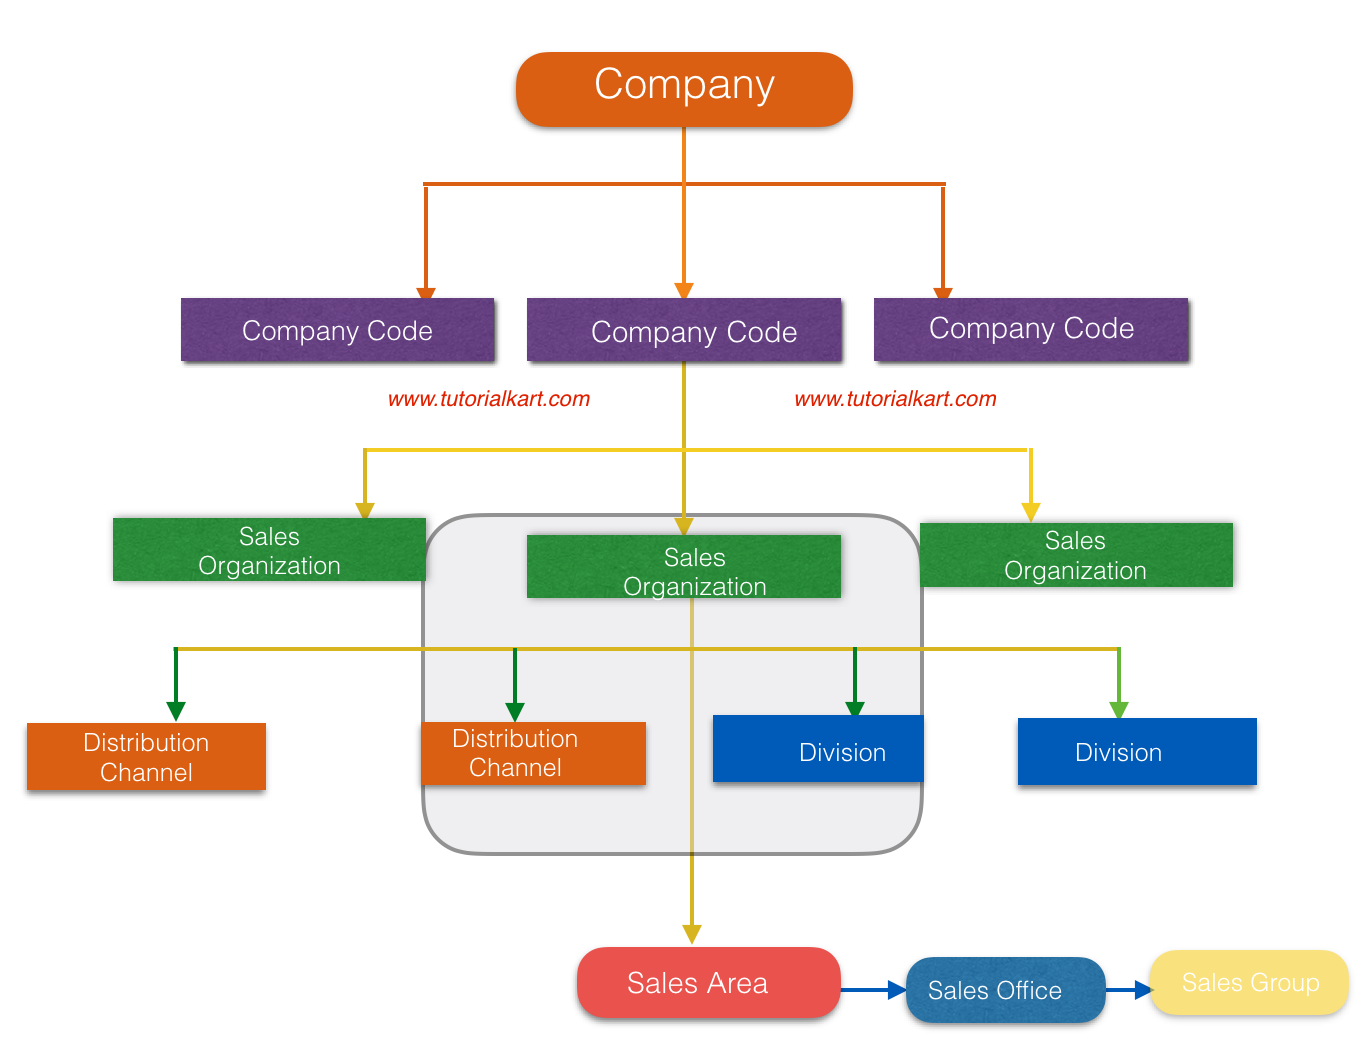 sales organization company code assignment table